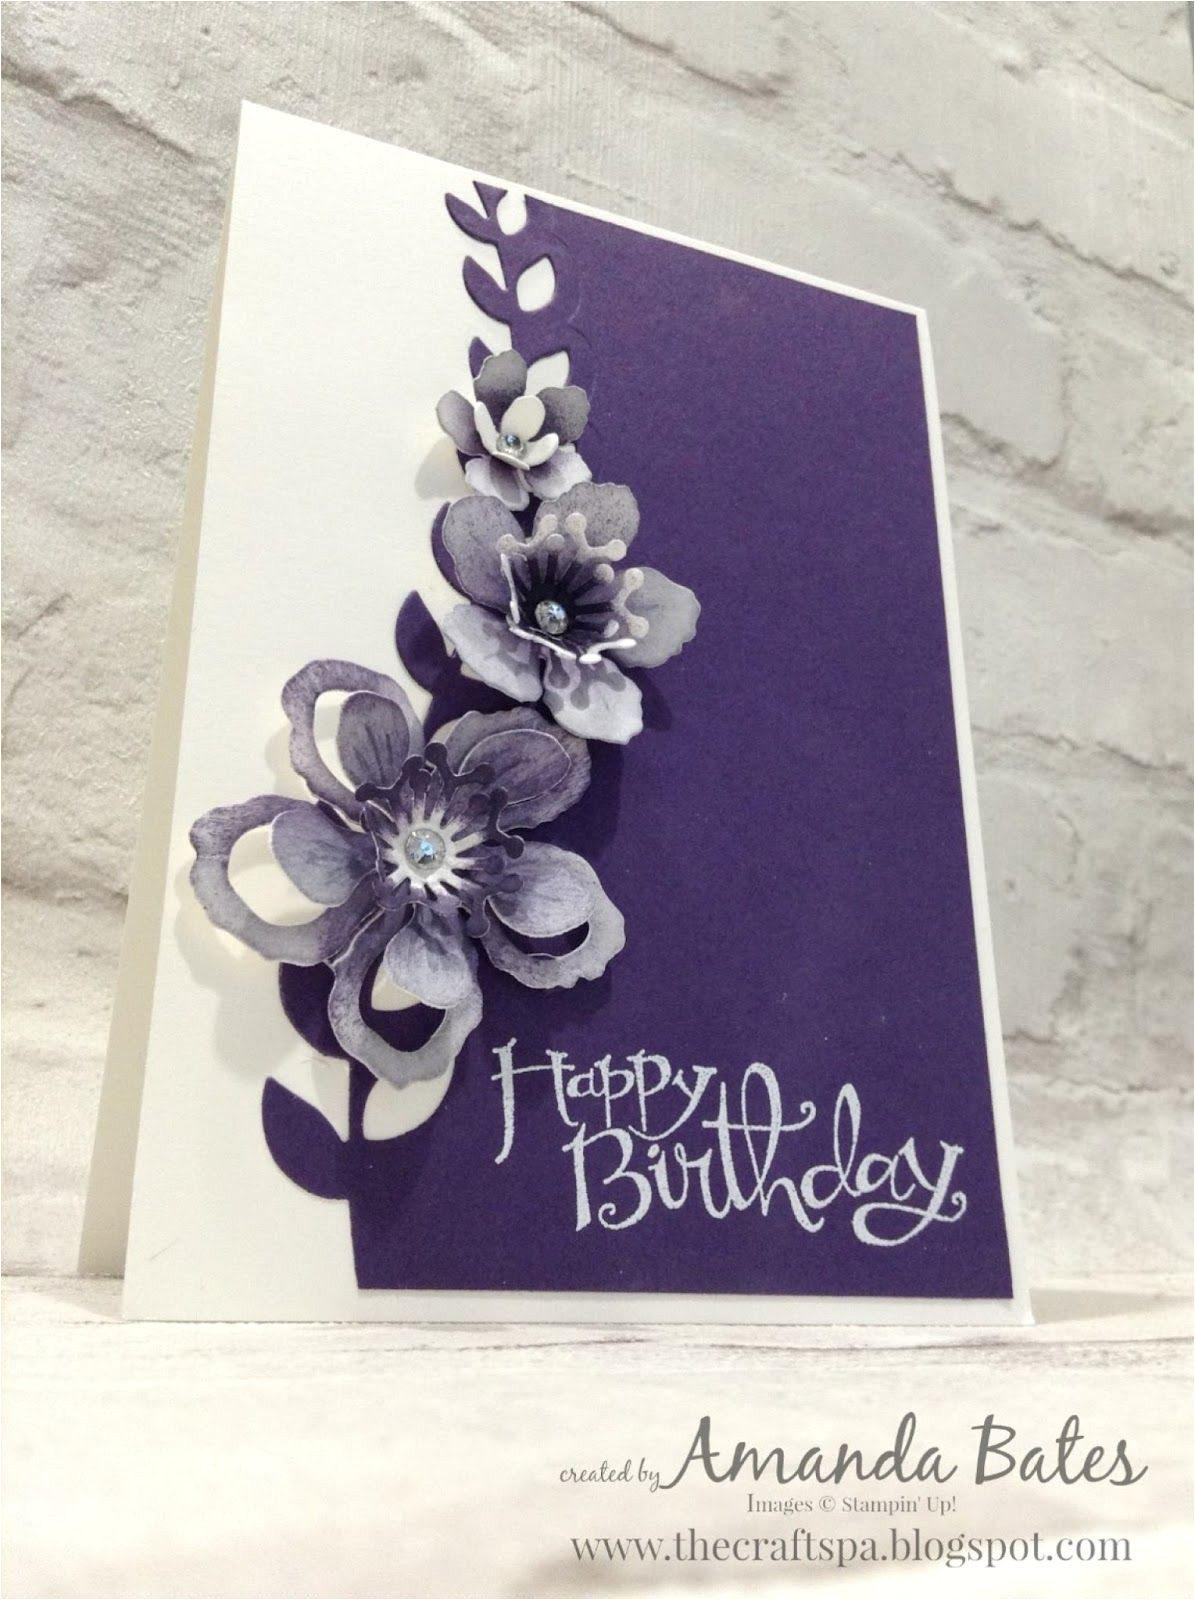 Card and Flowers Delivery Uk Botanical Blooms Trio Card with Images Floral Cards